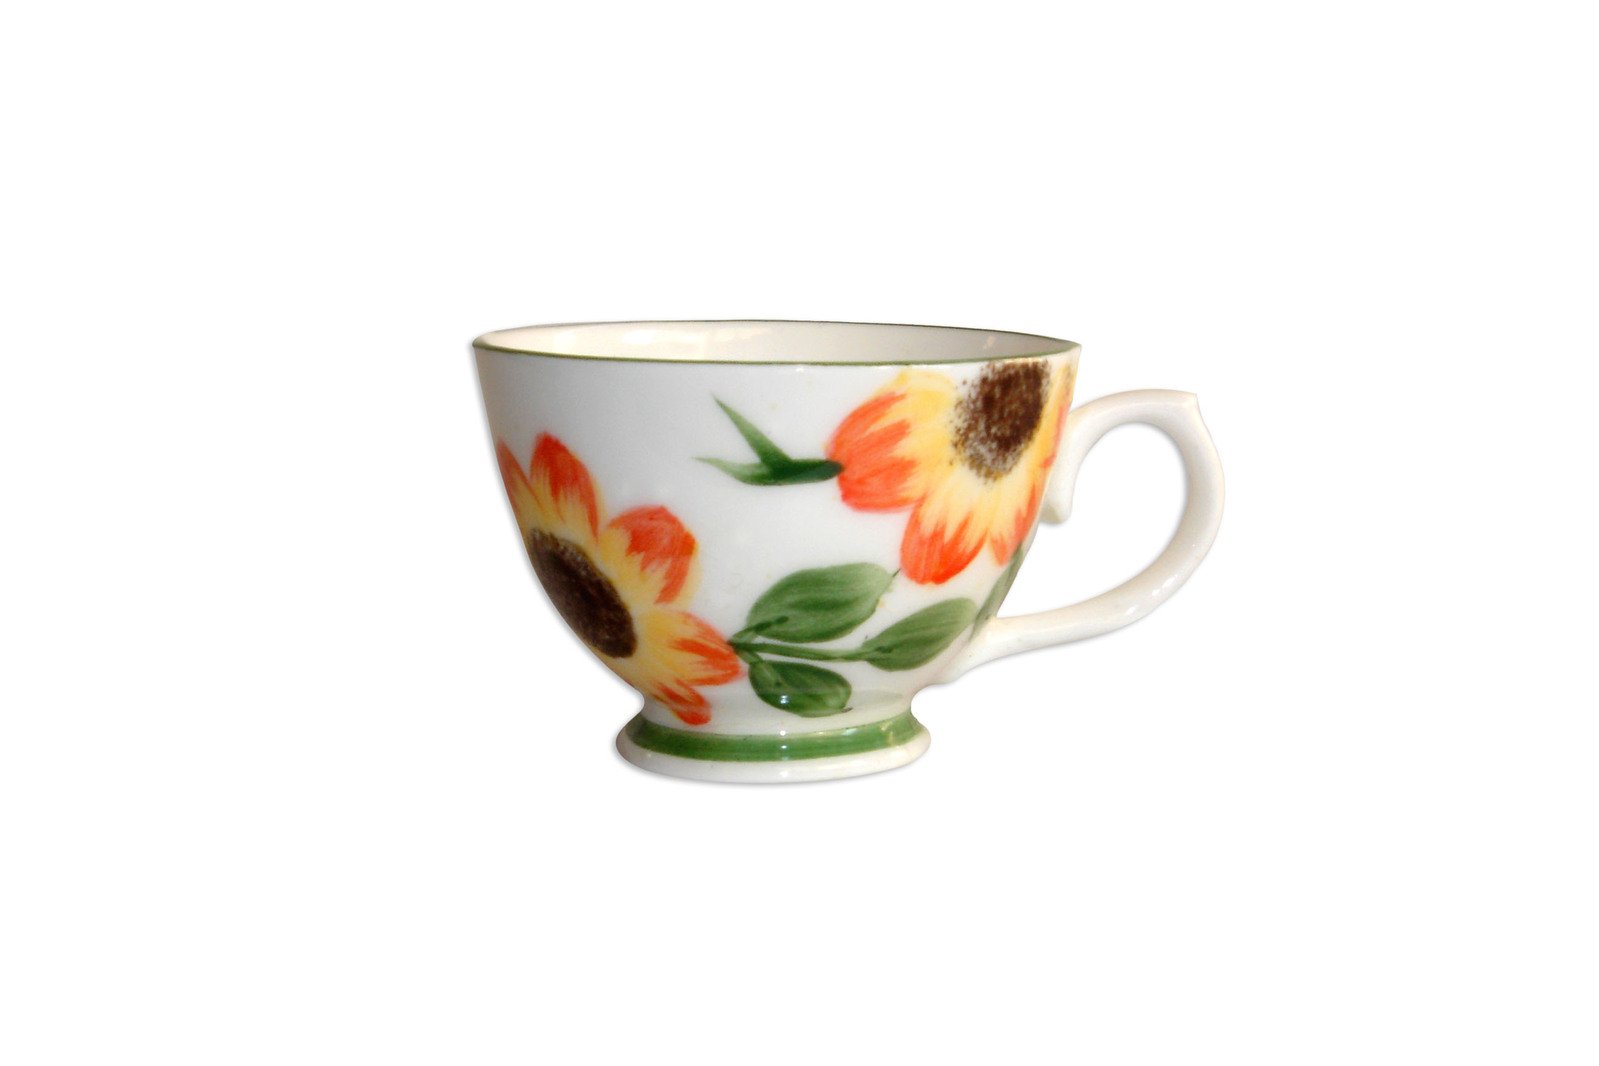 a cup that is decorated with orange flowers